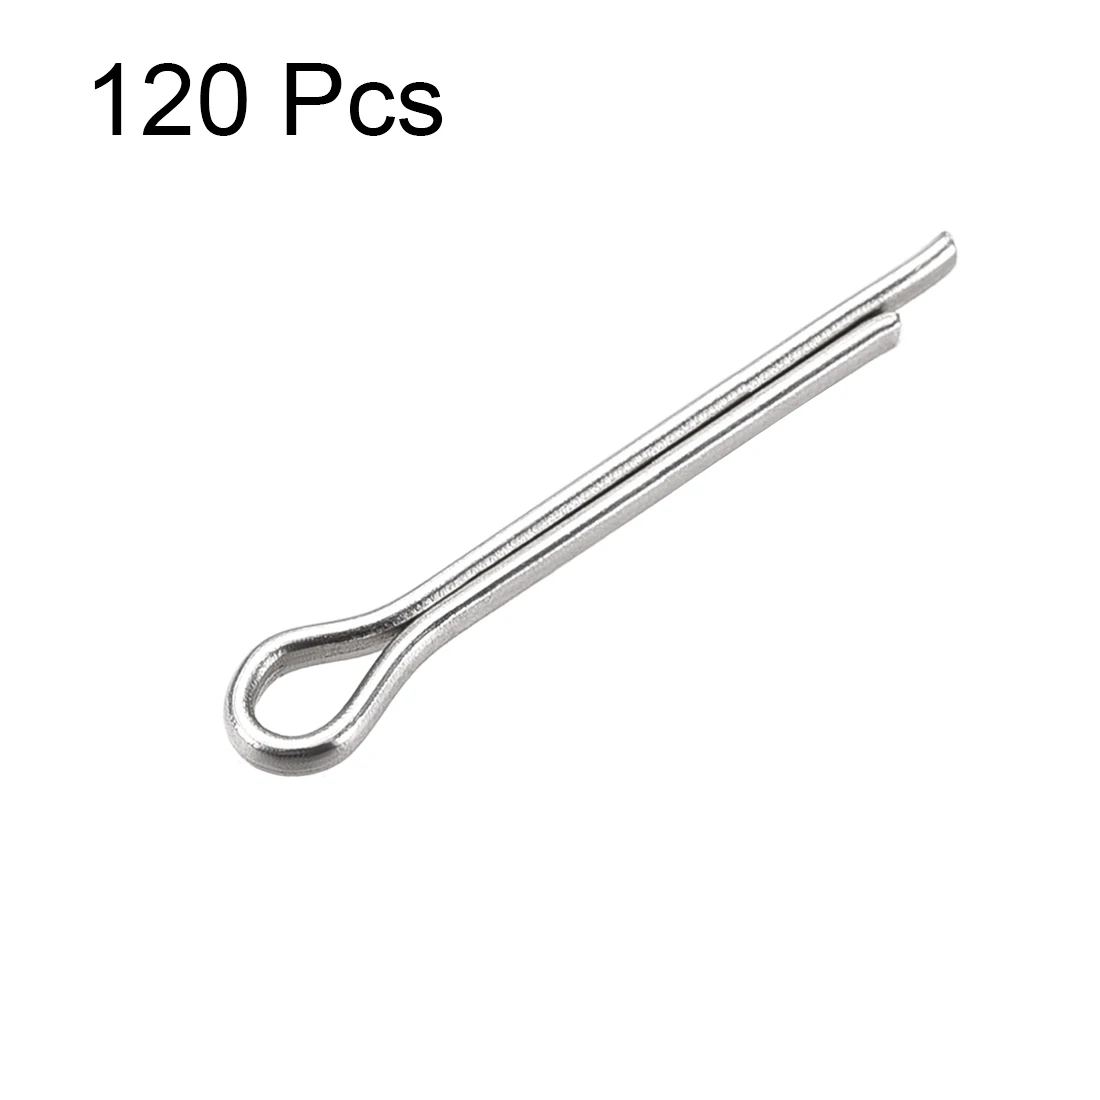 

uxcell 120Pcs Split Cotter Pin - 1.5mm x 12mm 304 Stainless Steel 2-Prongs Silver Tone for Secure Clevis Pins,Castle Nuts